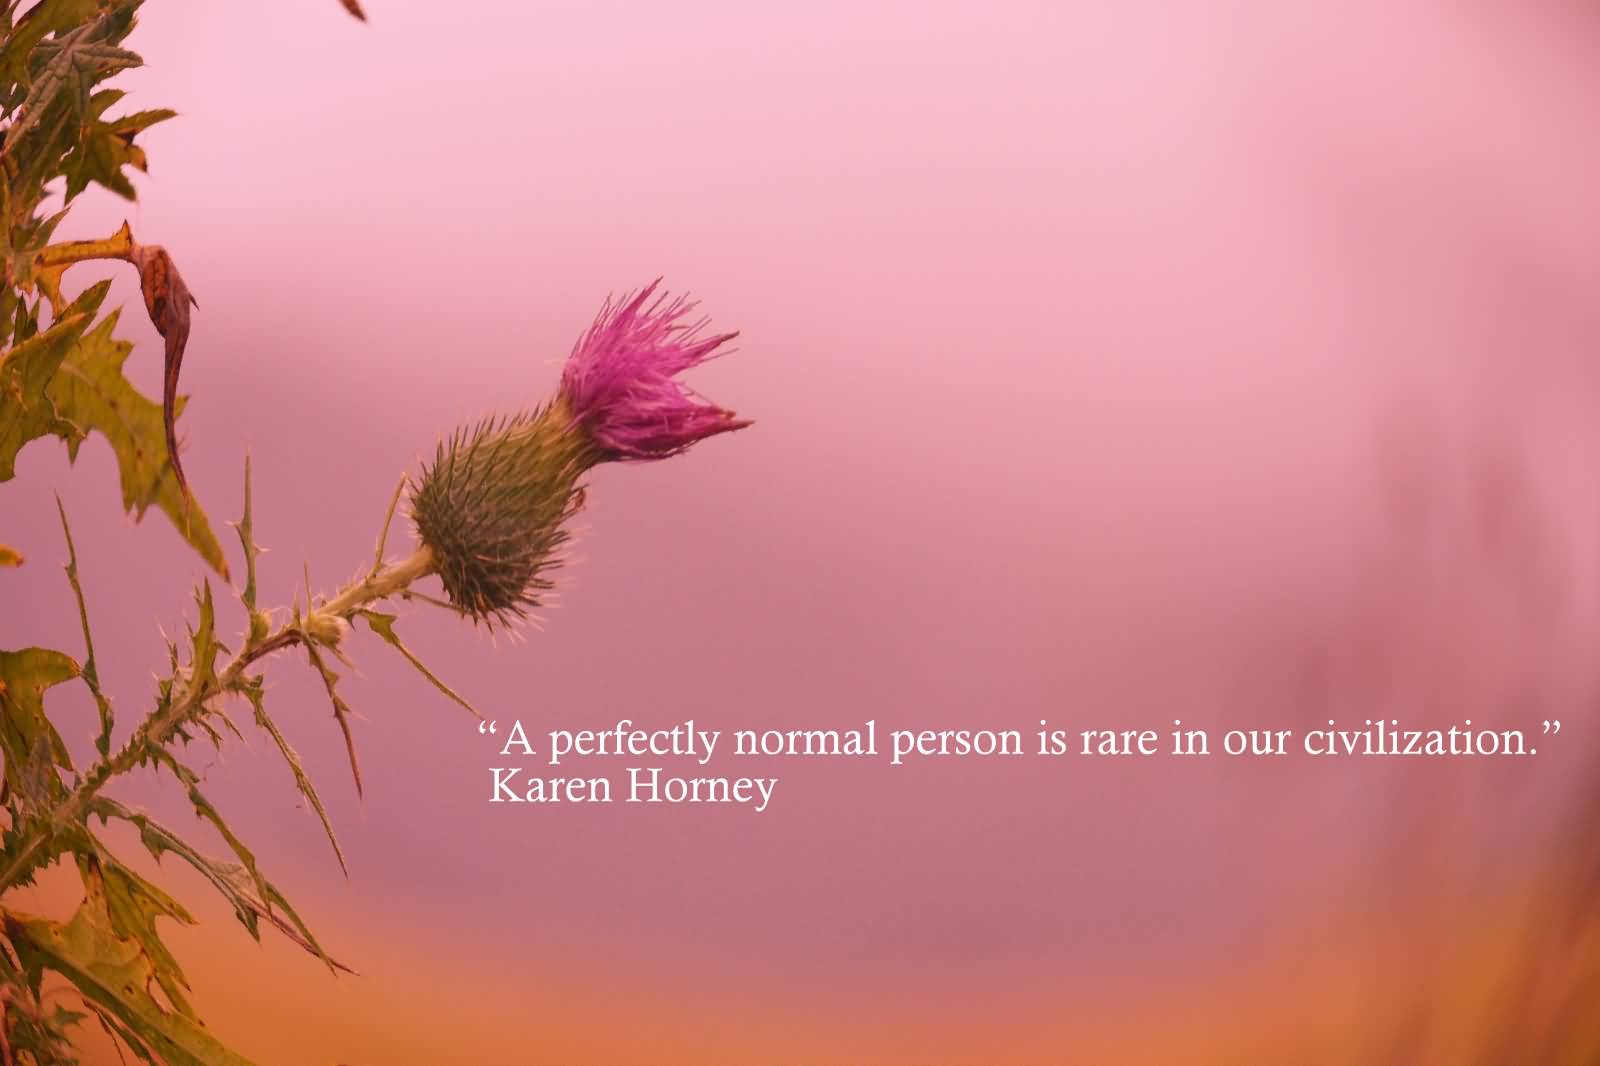 The perfect normal person is rare in our civilization. Karen Horney